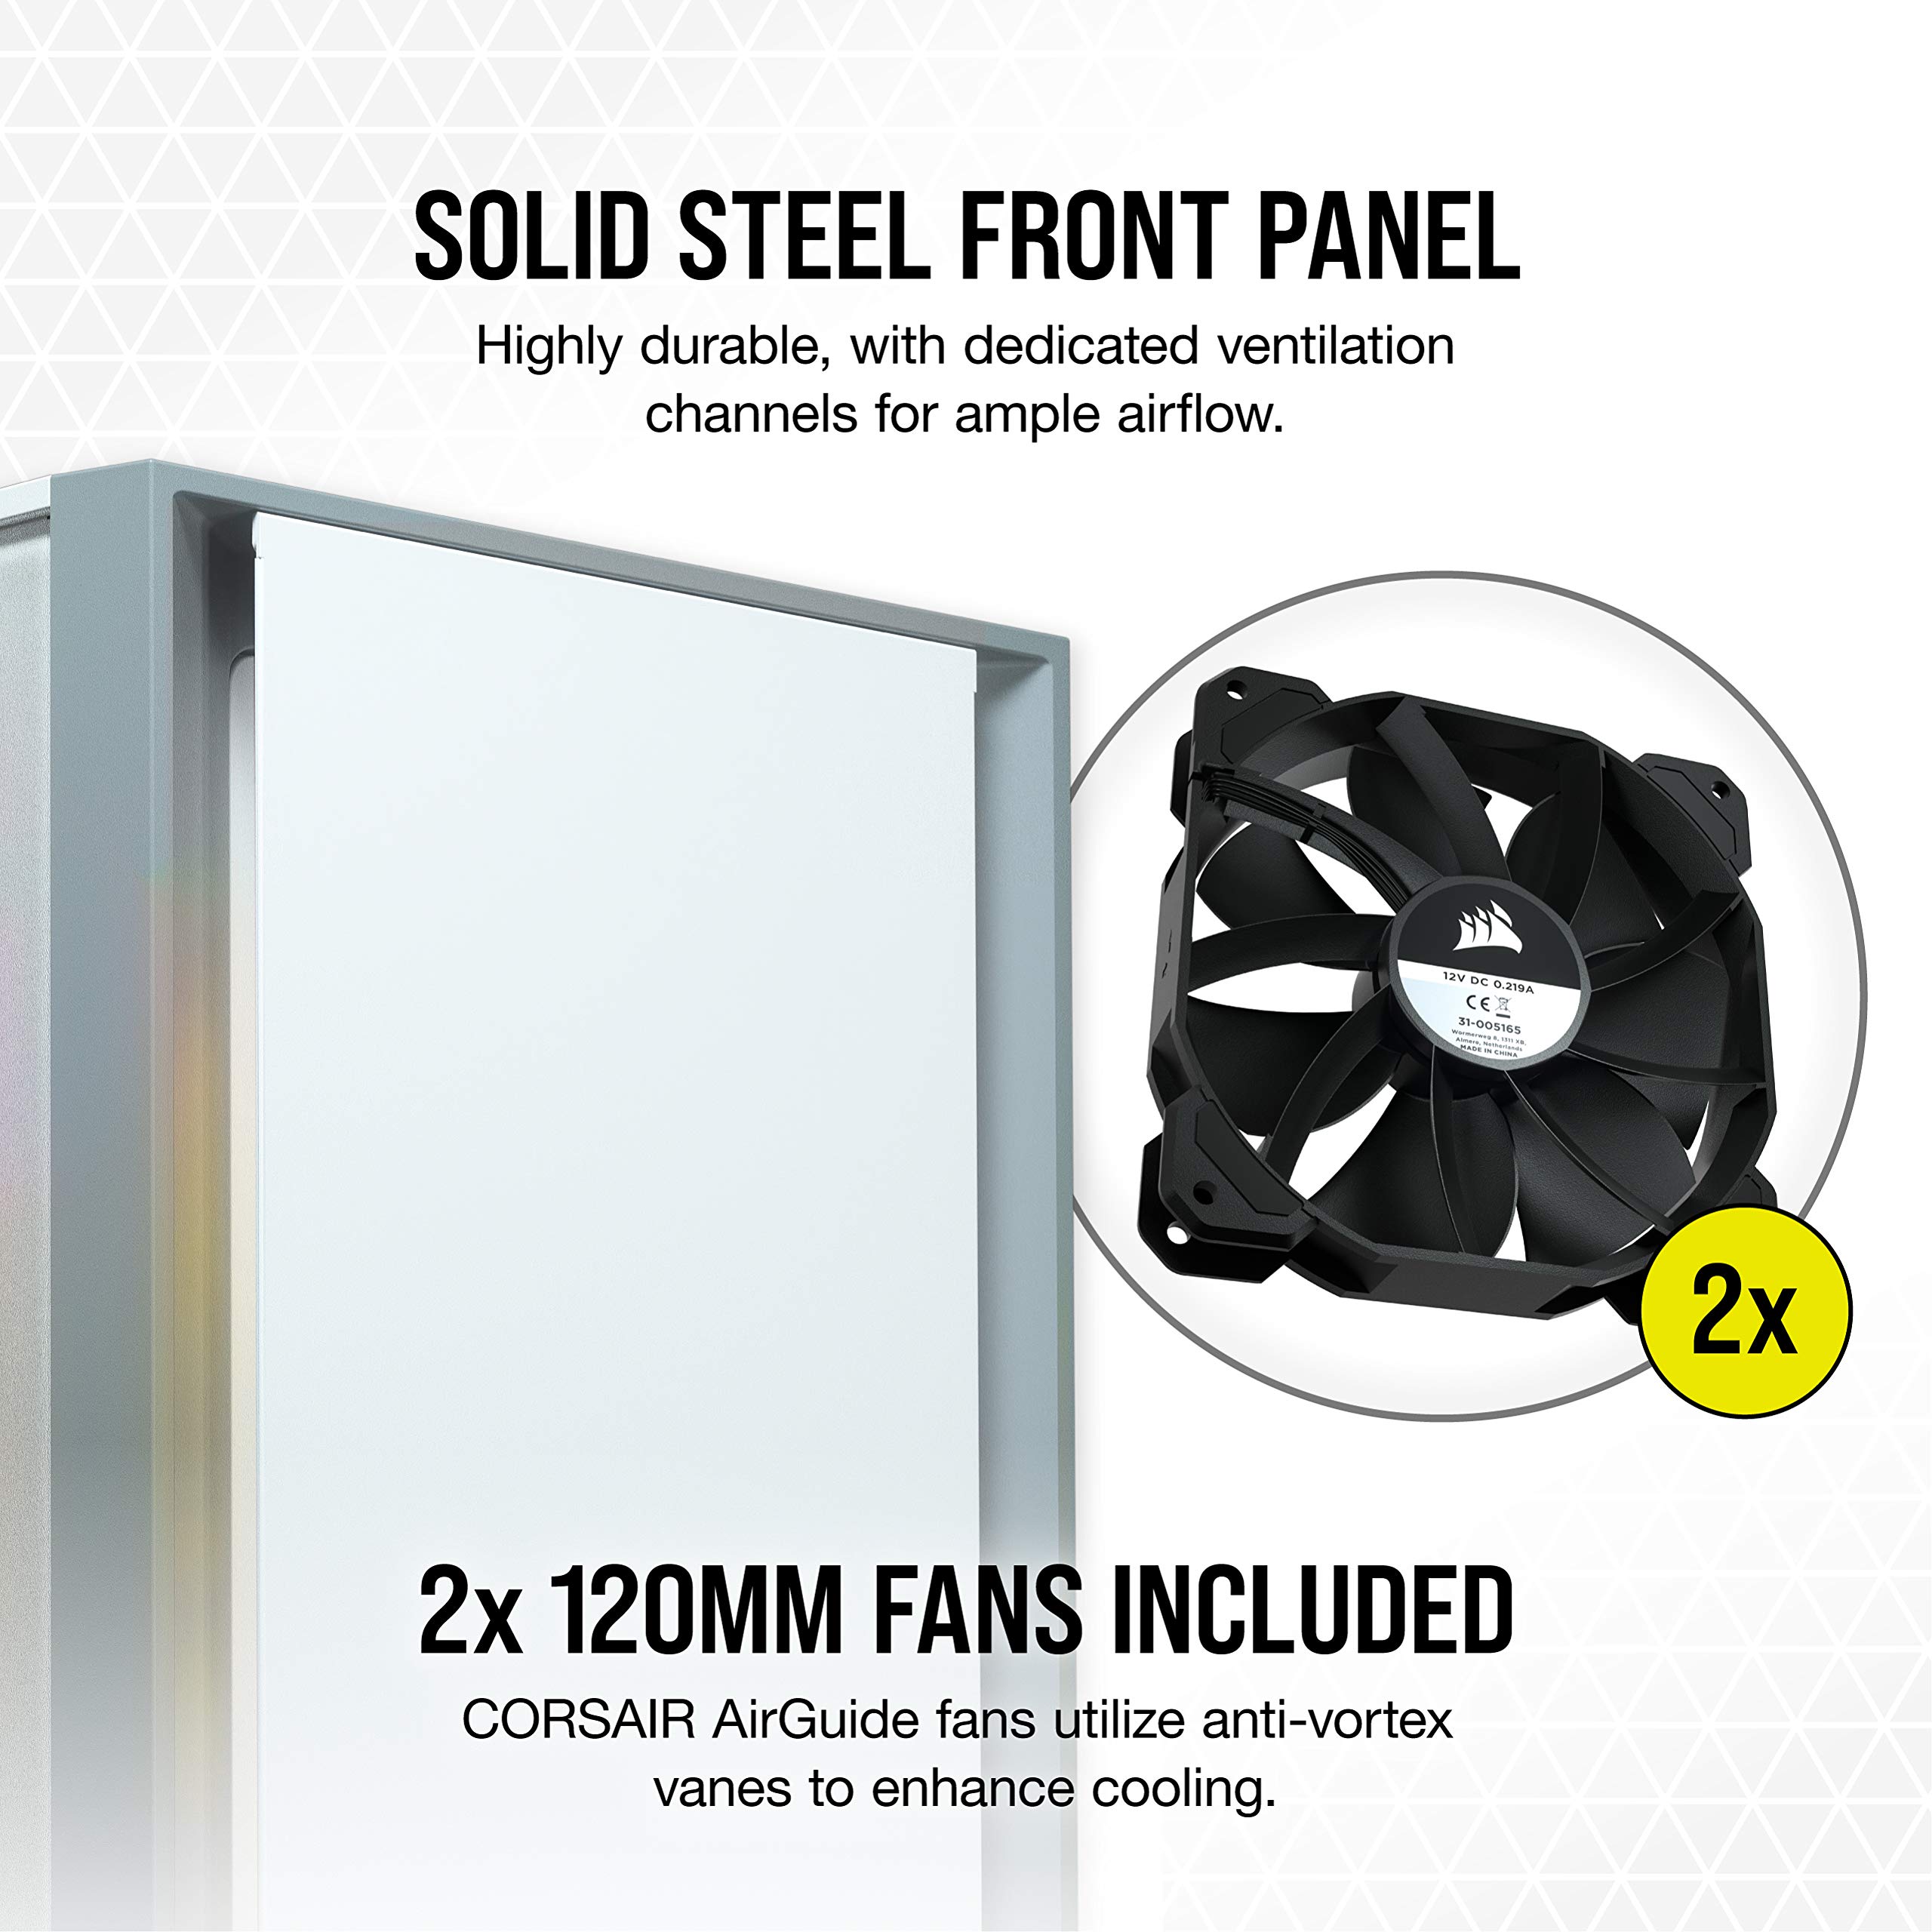 Corsair 4000D Tempered Glass Mid-Tower ATX PC Case - White 59.99 free ship